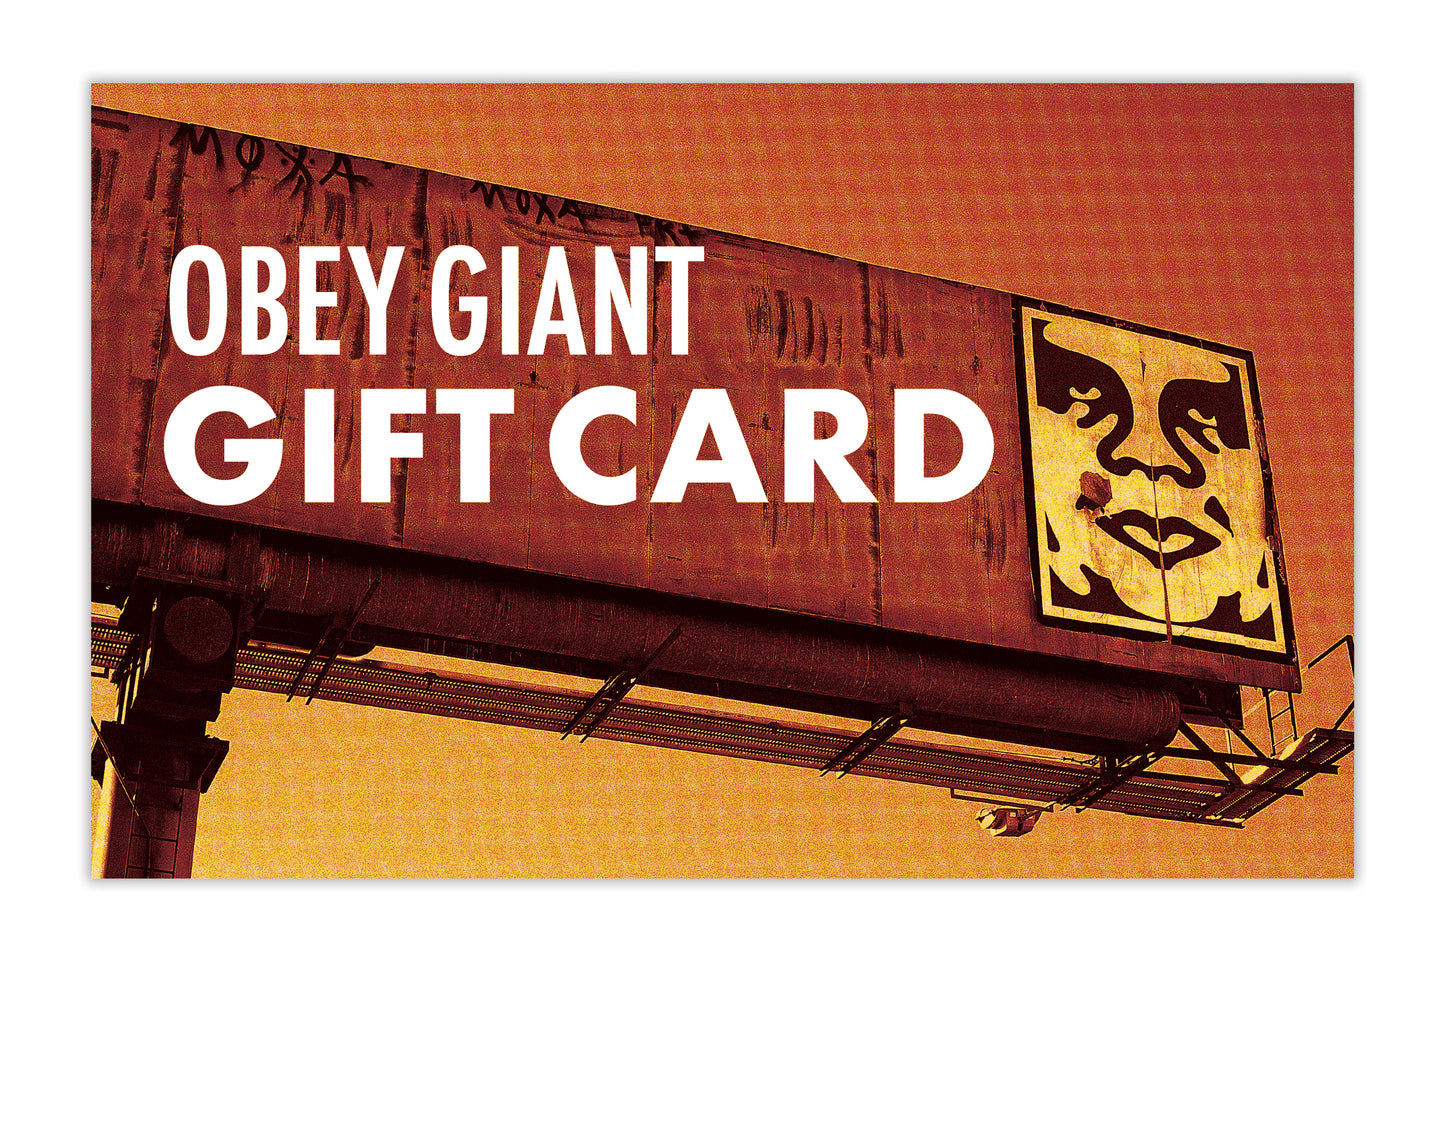 Obey Giant gift card